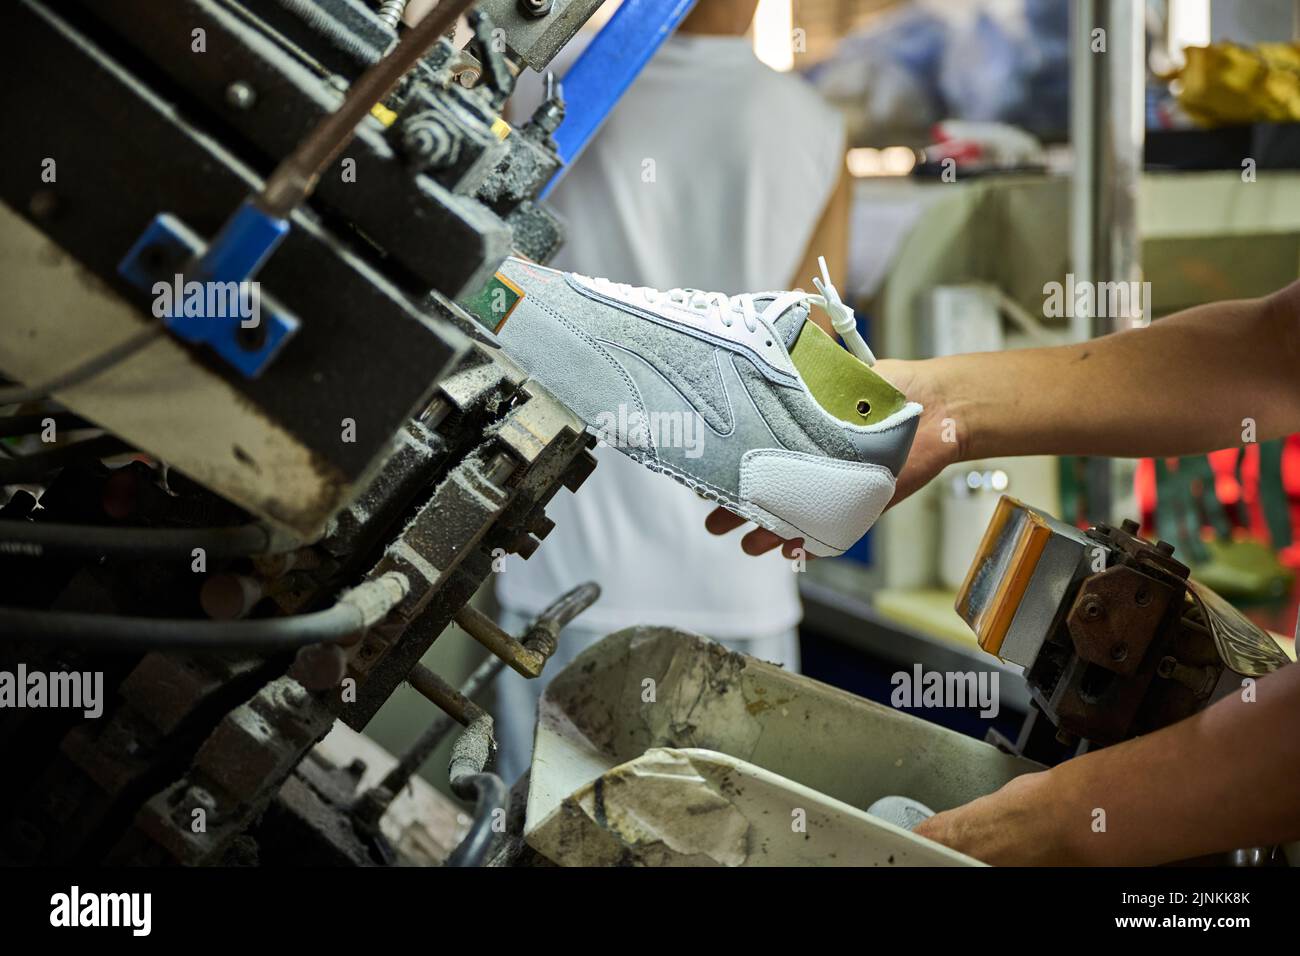 sneaker.production